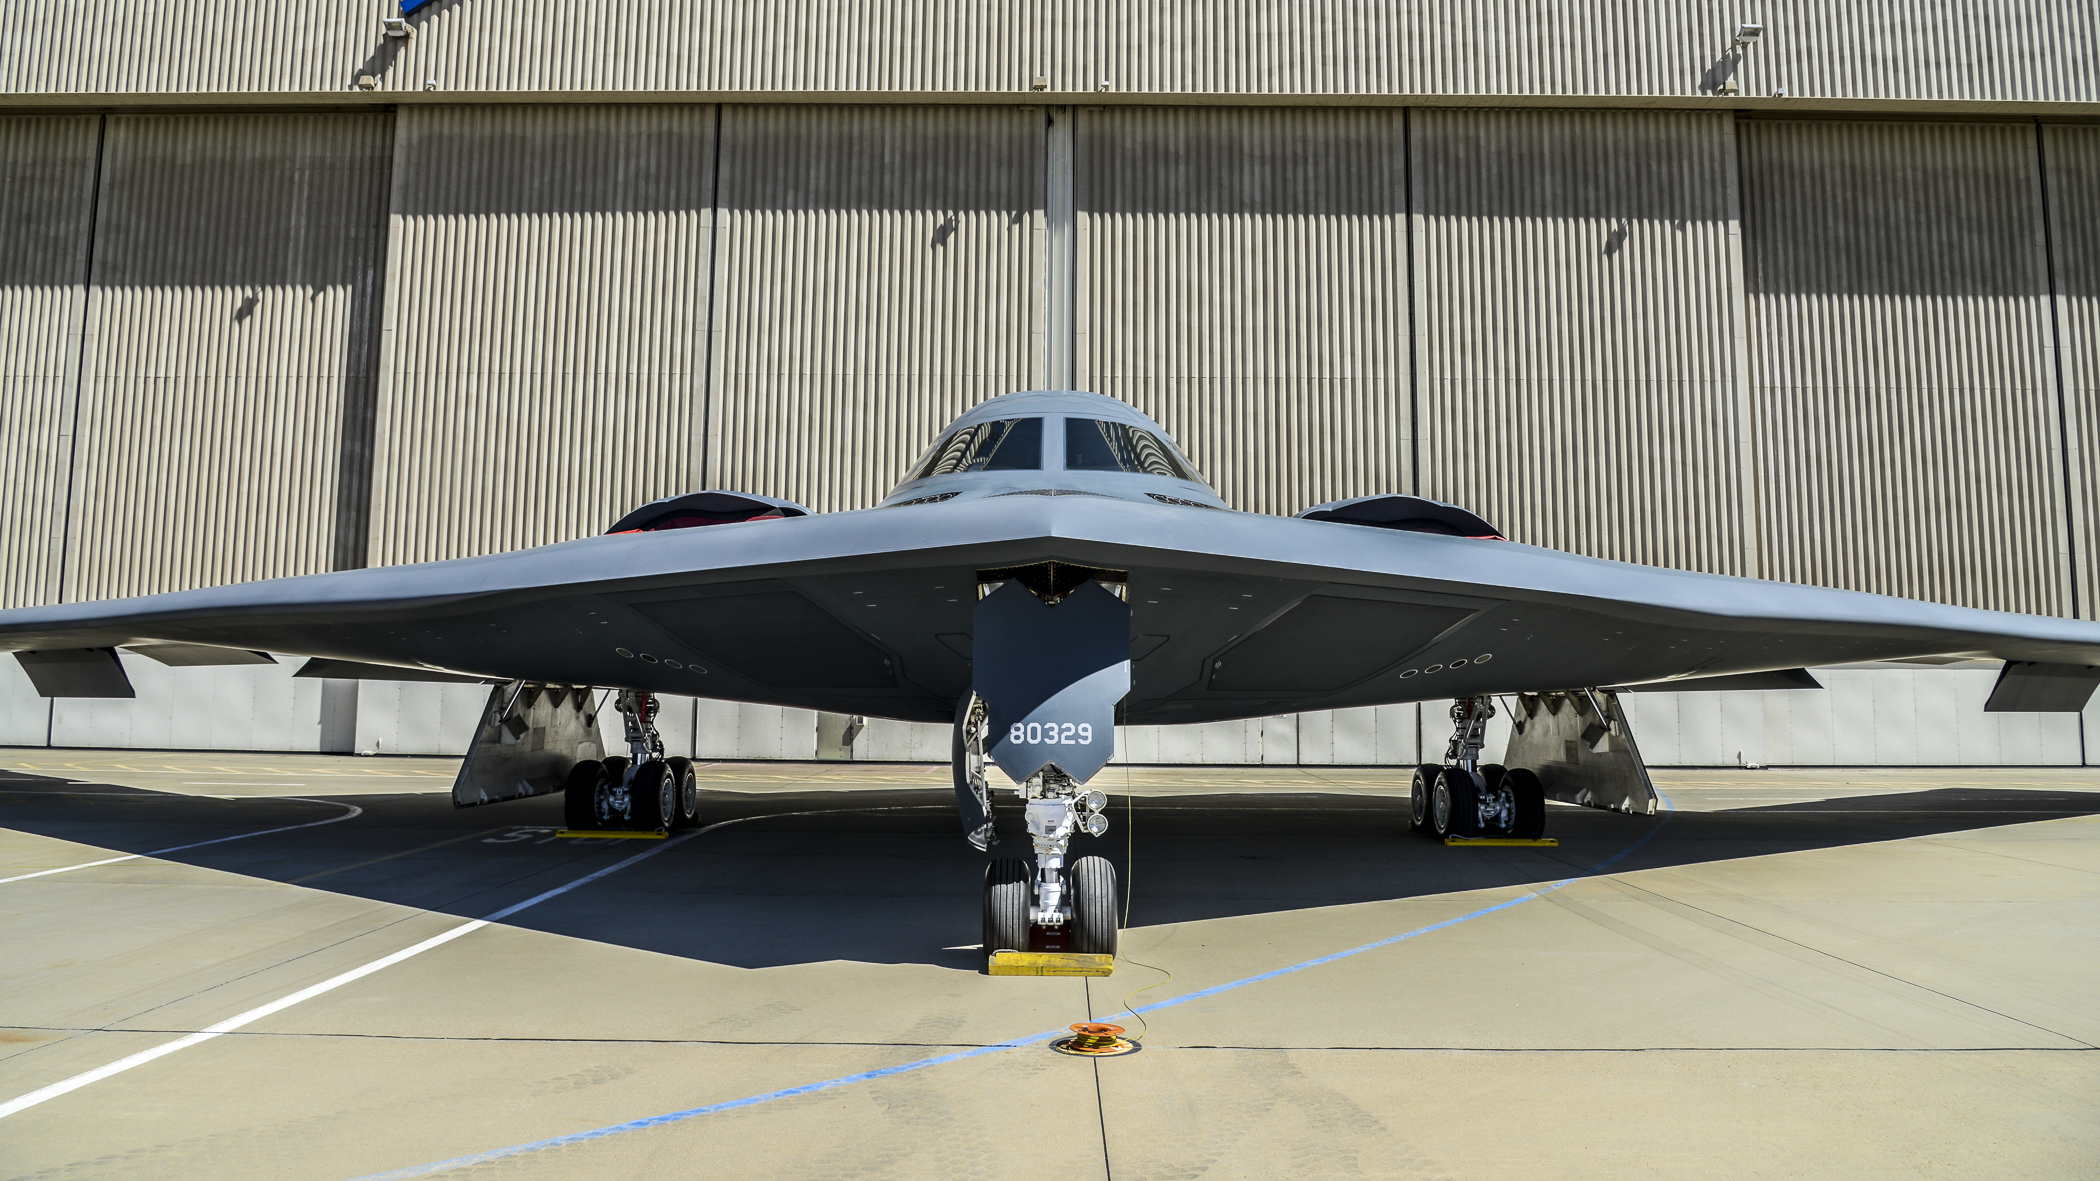 Take A Look Inside the Air Force's Famous B-2 Stealth Bomber | The